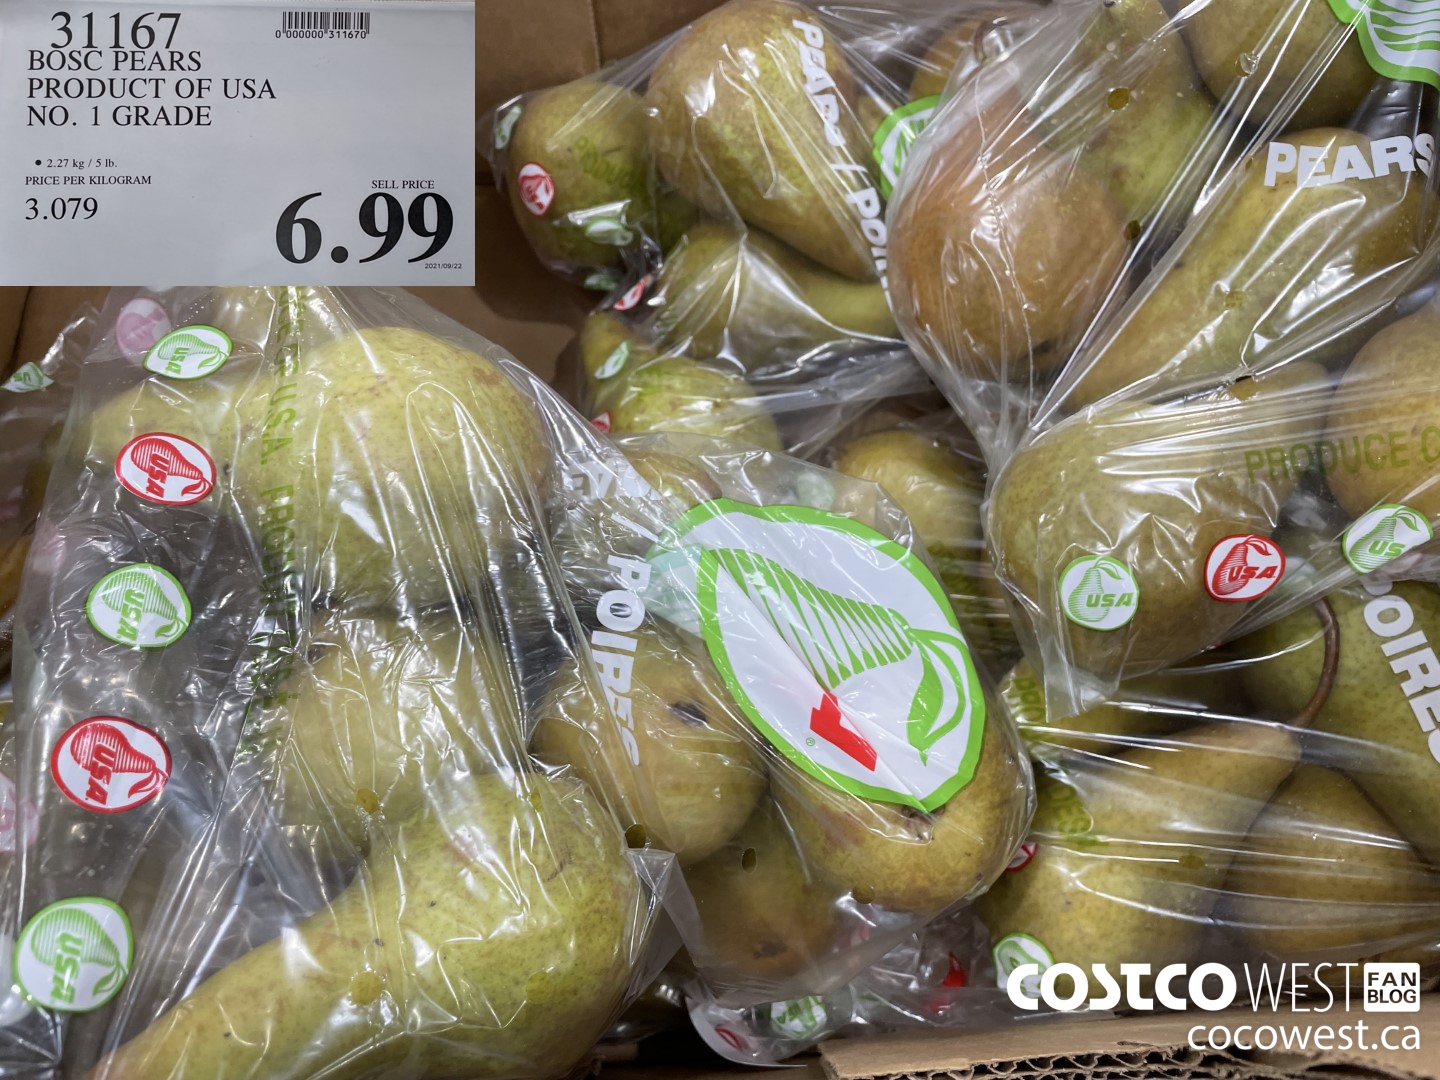 https://west.cocowest1.ca/2021/10/BOSC_PEARS_PRODUCT_OF_USA_NO_1_GRADE__20211004_73528.jpg